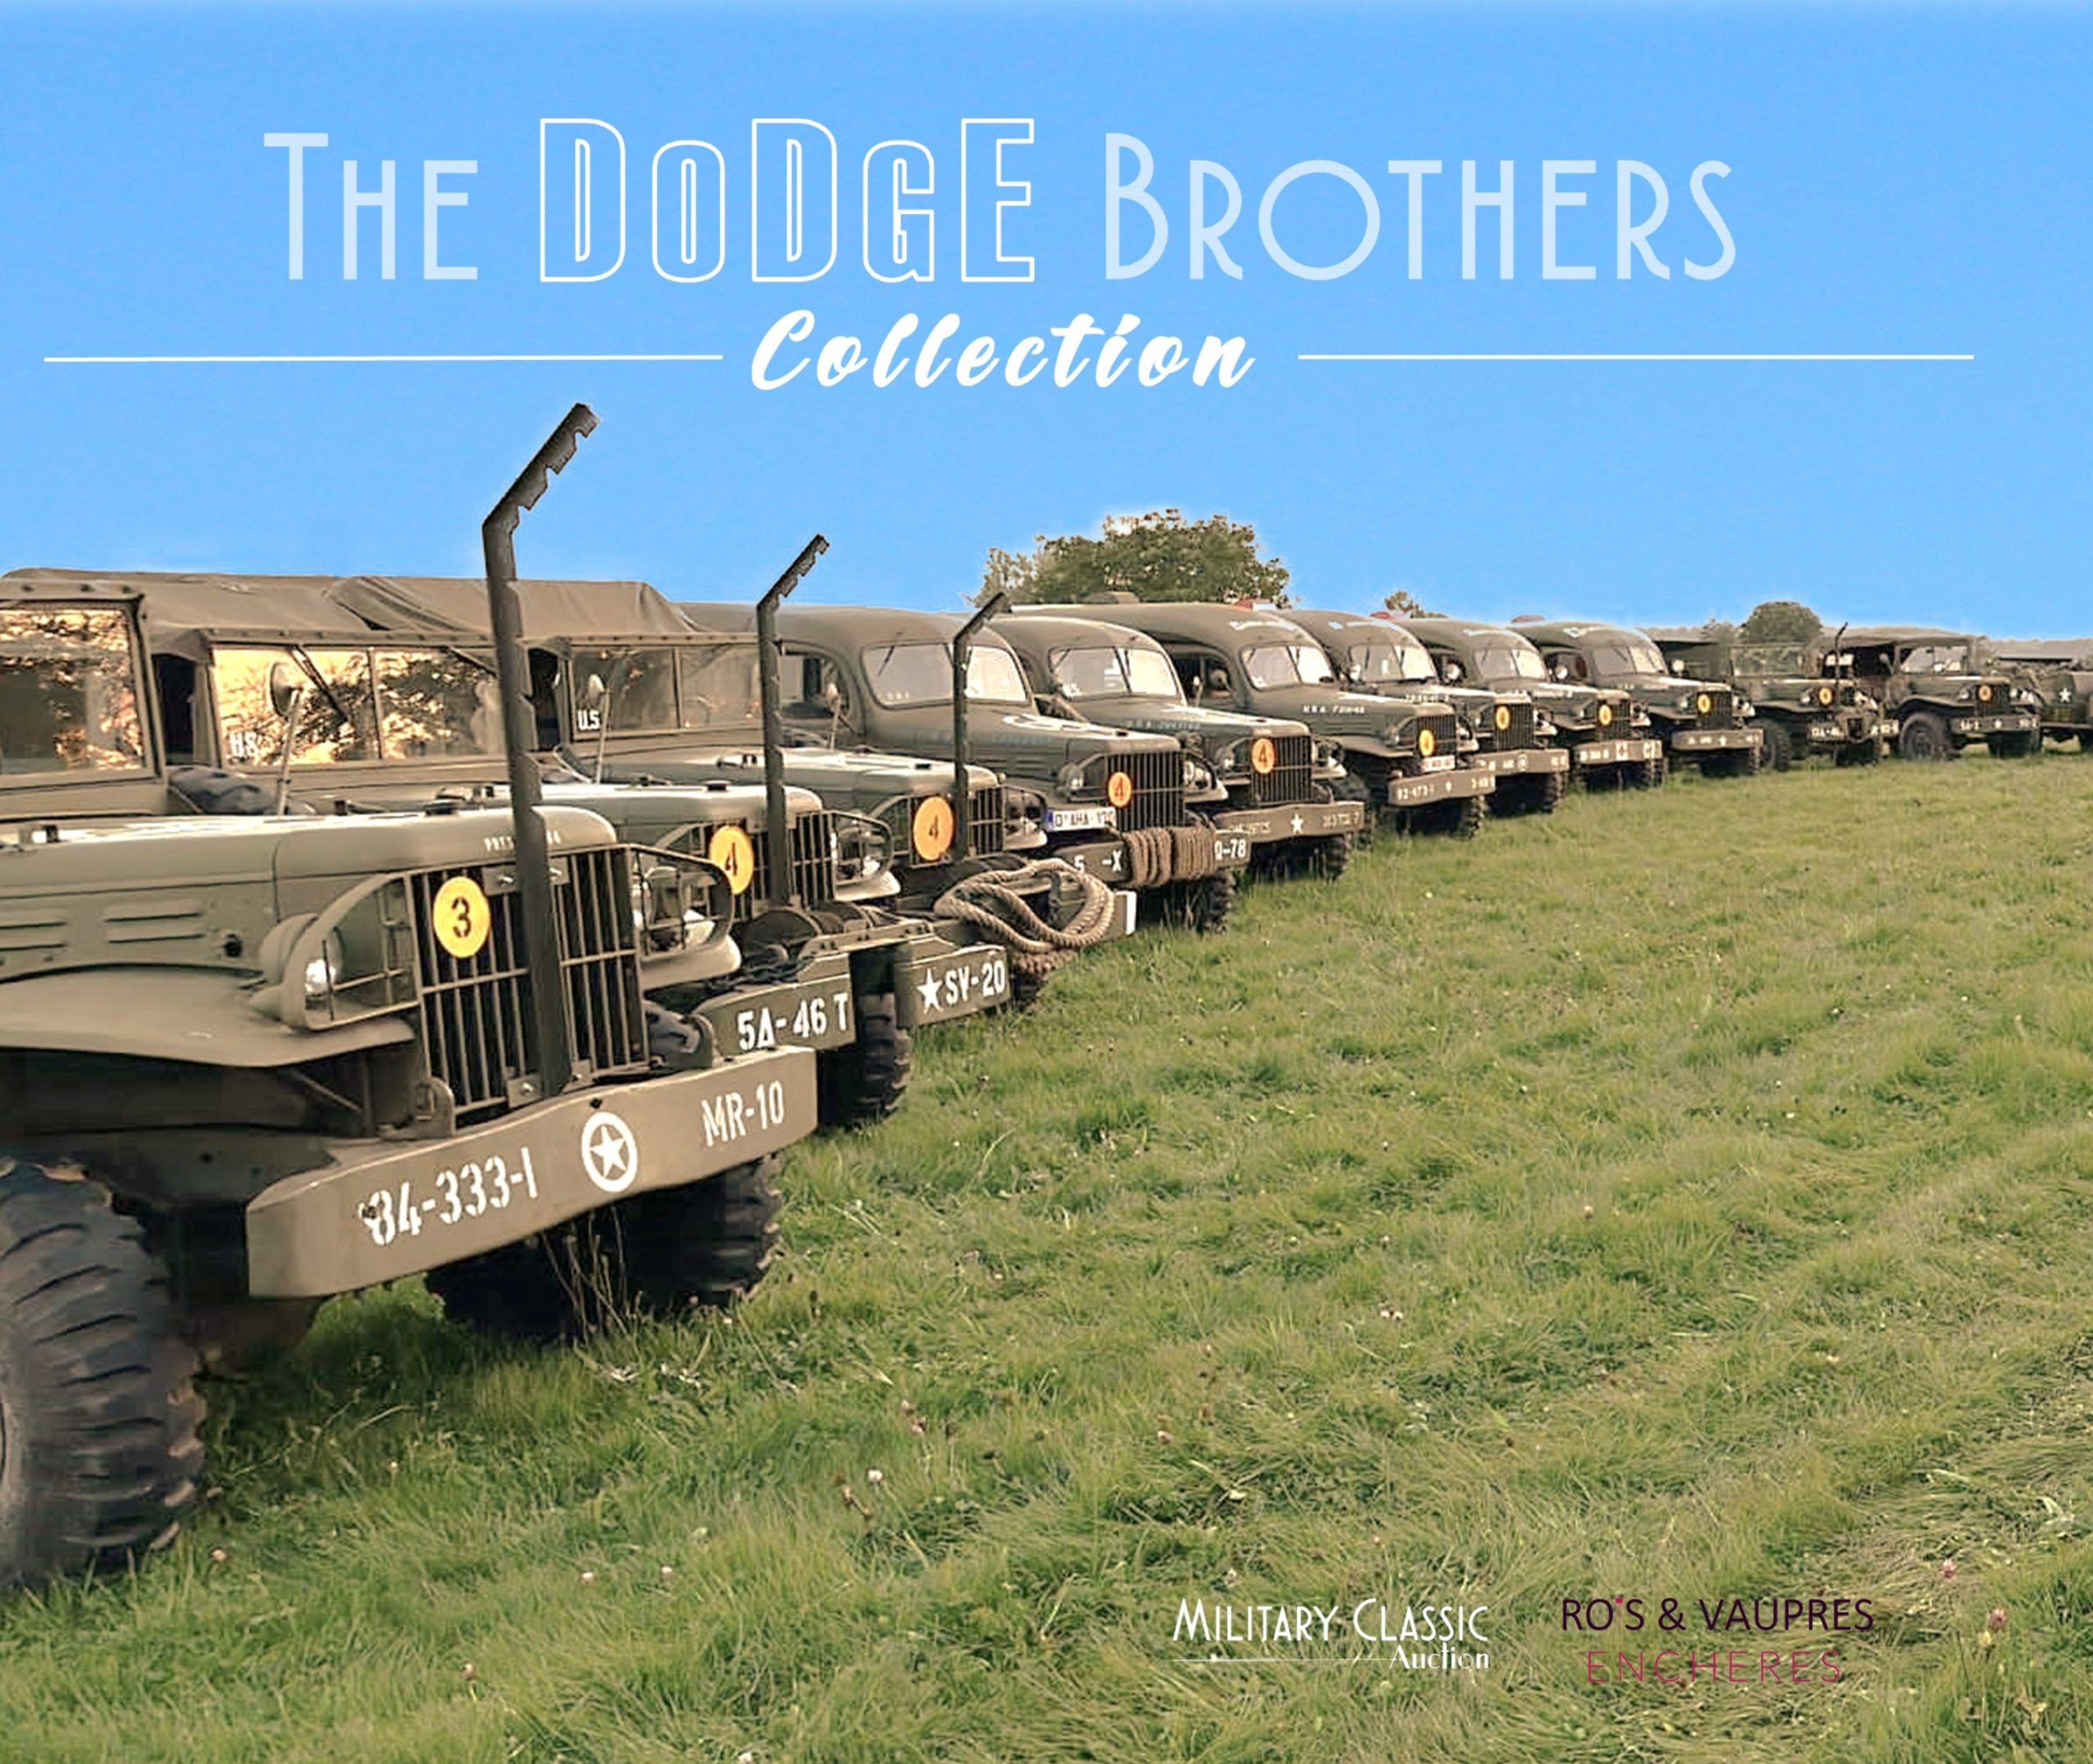 The Dodge Brothers Collection